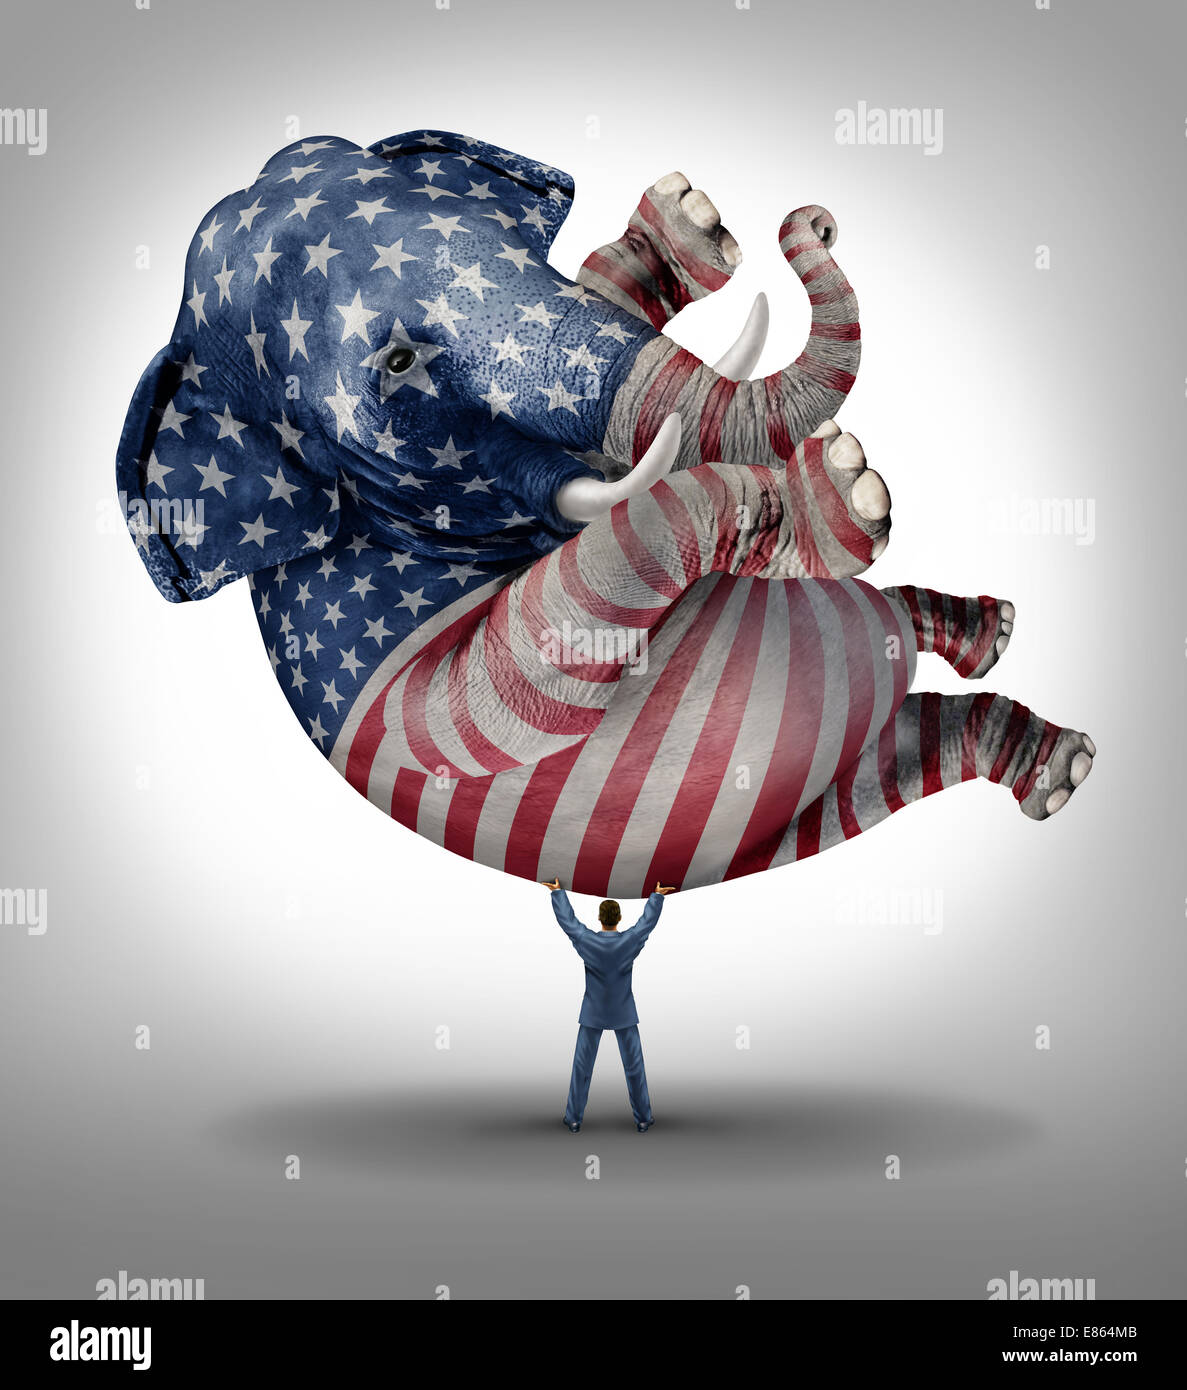 American republican vote election leadership symbol as an elephant with a painted flag of the United States with a person lifting up the animal as an icon of the conservative values in a voting campaign for president senator or congressman. Stock Photo